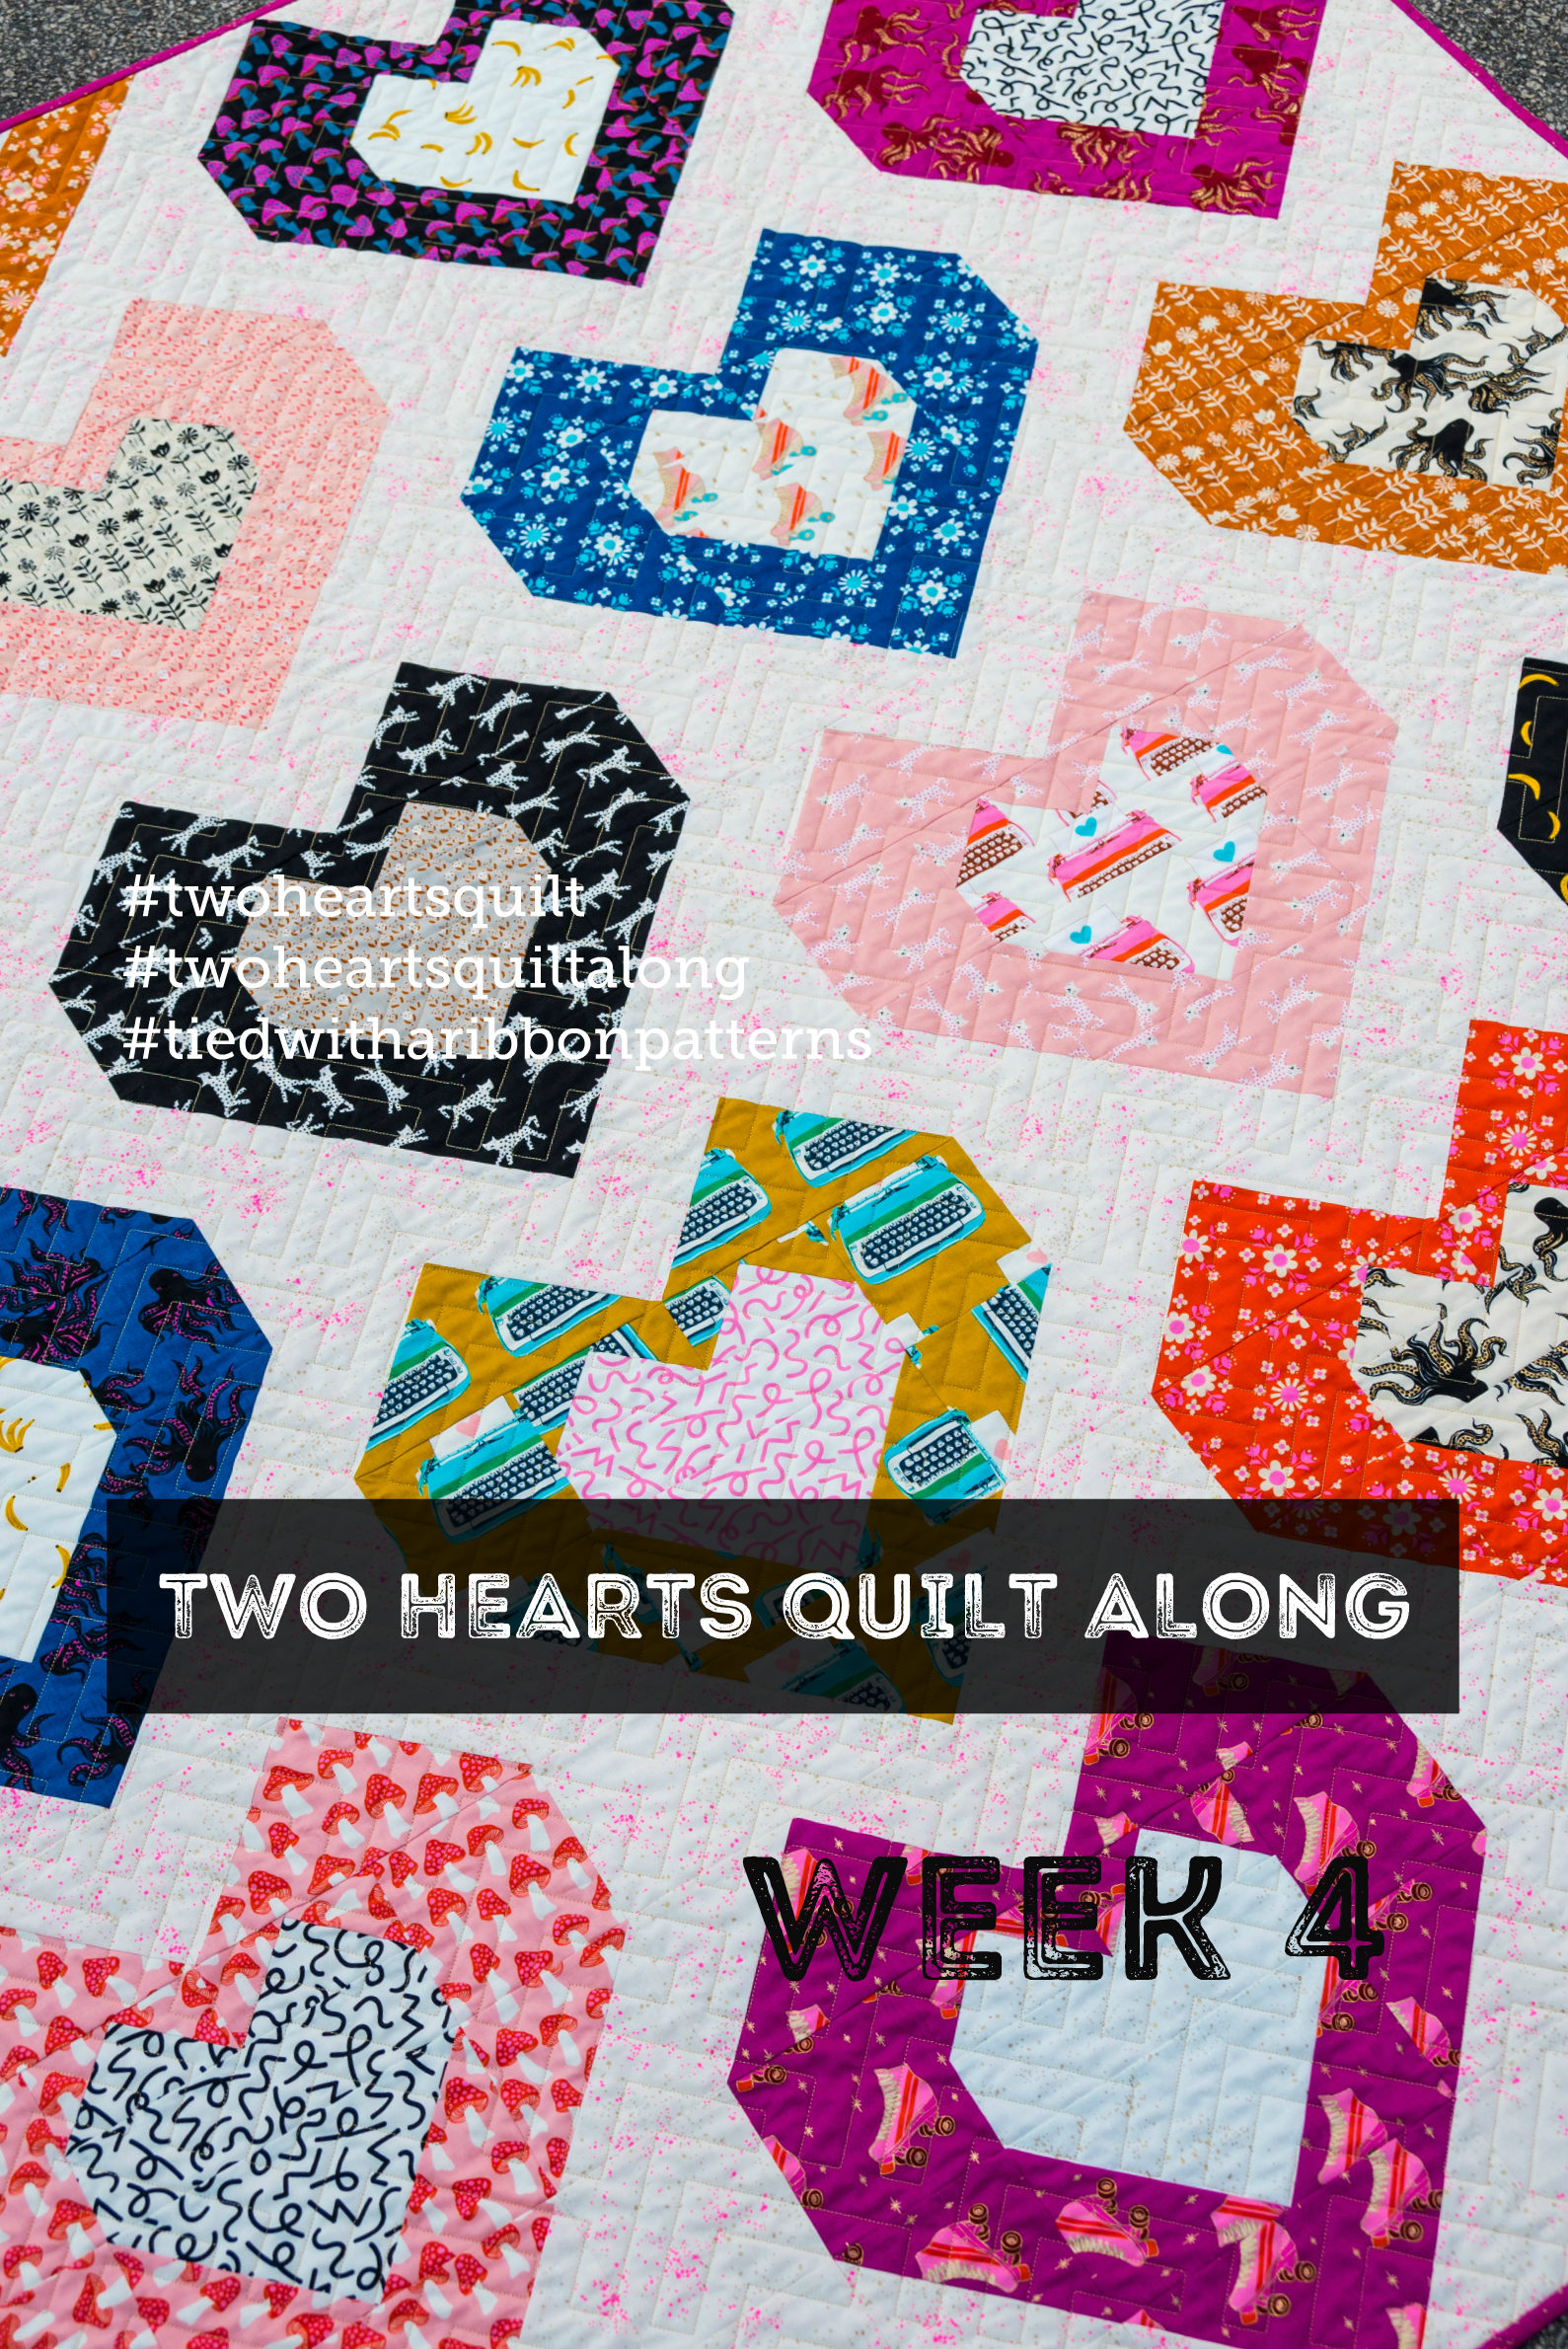 Tied with a Ribbon: How to sew your Quilt Binding continuously